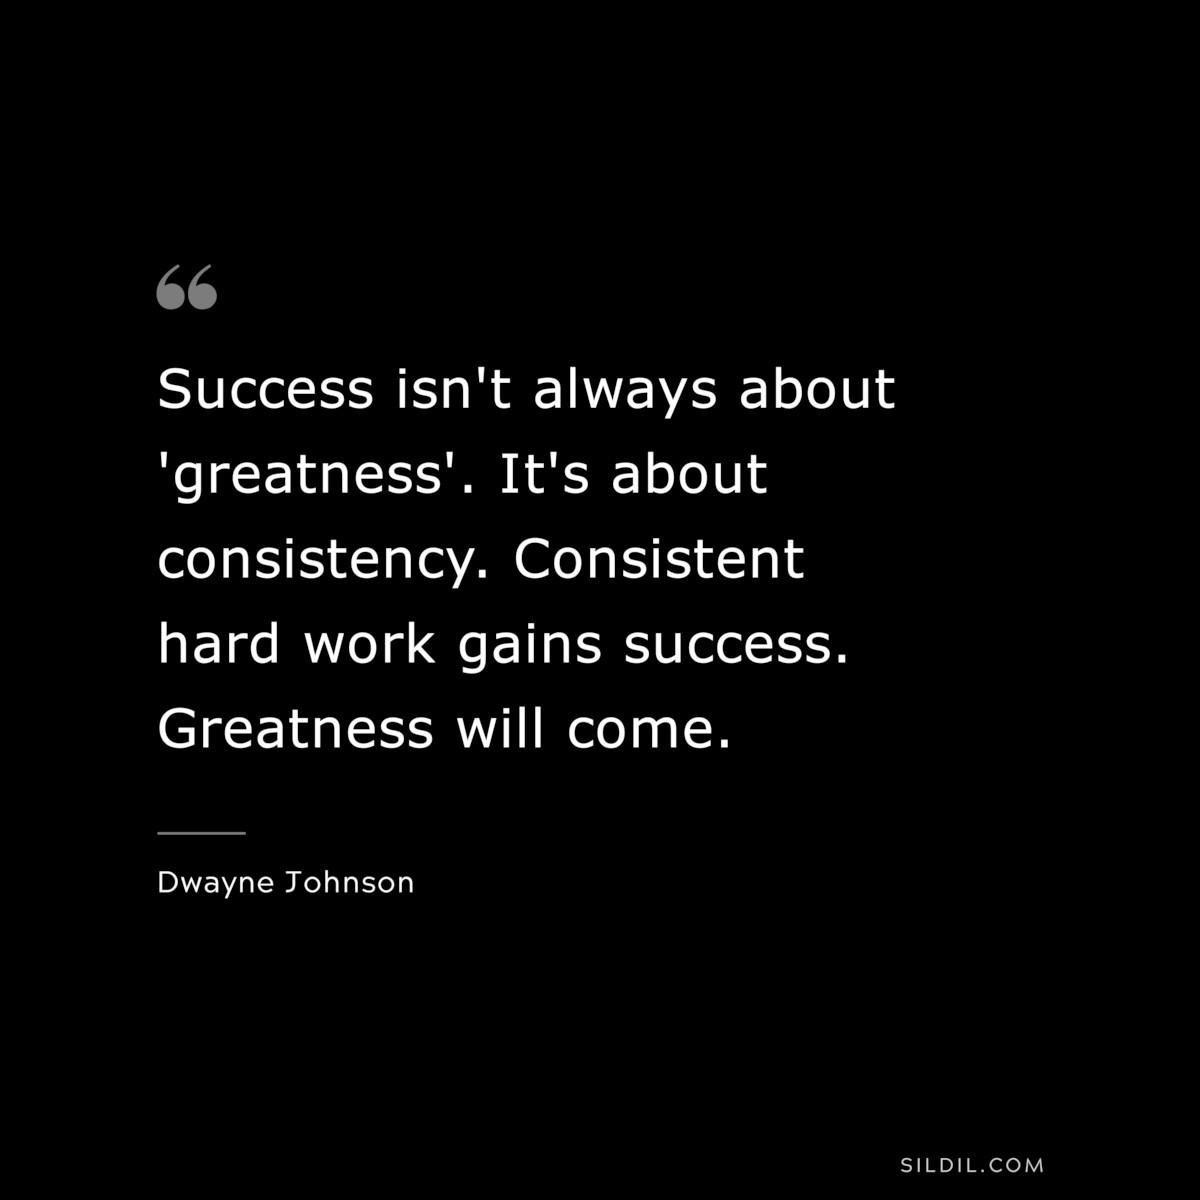 Success isn't always about 'greatness'. It's about consistency. Consistent hard work gains success. Greatness will come. ― Dwayne Johnson